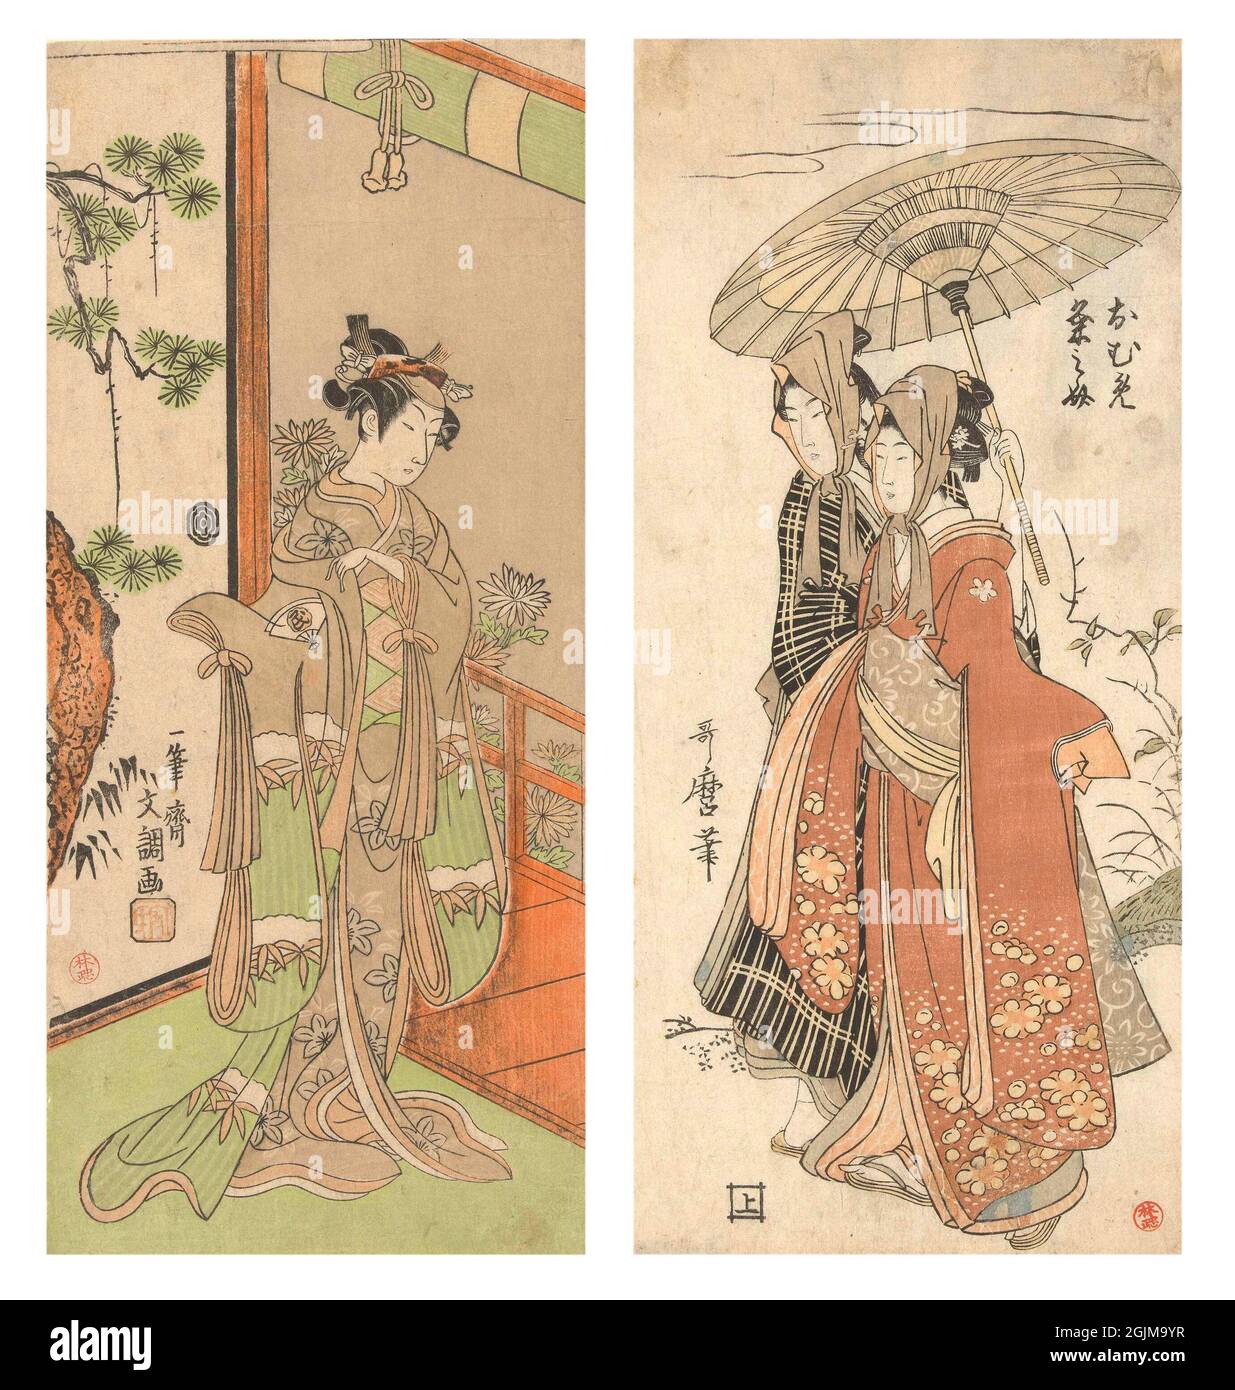 Unique optimised and enhanced arrangement of two historical Japanese woodcut illustrations. From left to right: 1.Actor Onoe Tamizo playing a  female role in kimono with snowy bamboo pattern, standing in front of sliding door with painting of pine tree, looking out over veranda, blooming chrysanthemums behind (1768 - 1772). 2.The runaway lovers Oume and Kumenosuke, both wearing headscarves, under an umbrella / parasol. (1800-1805) Stock Photo